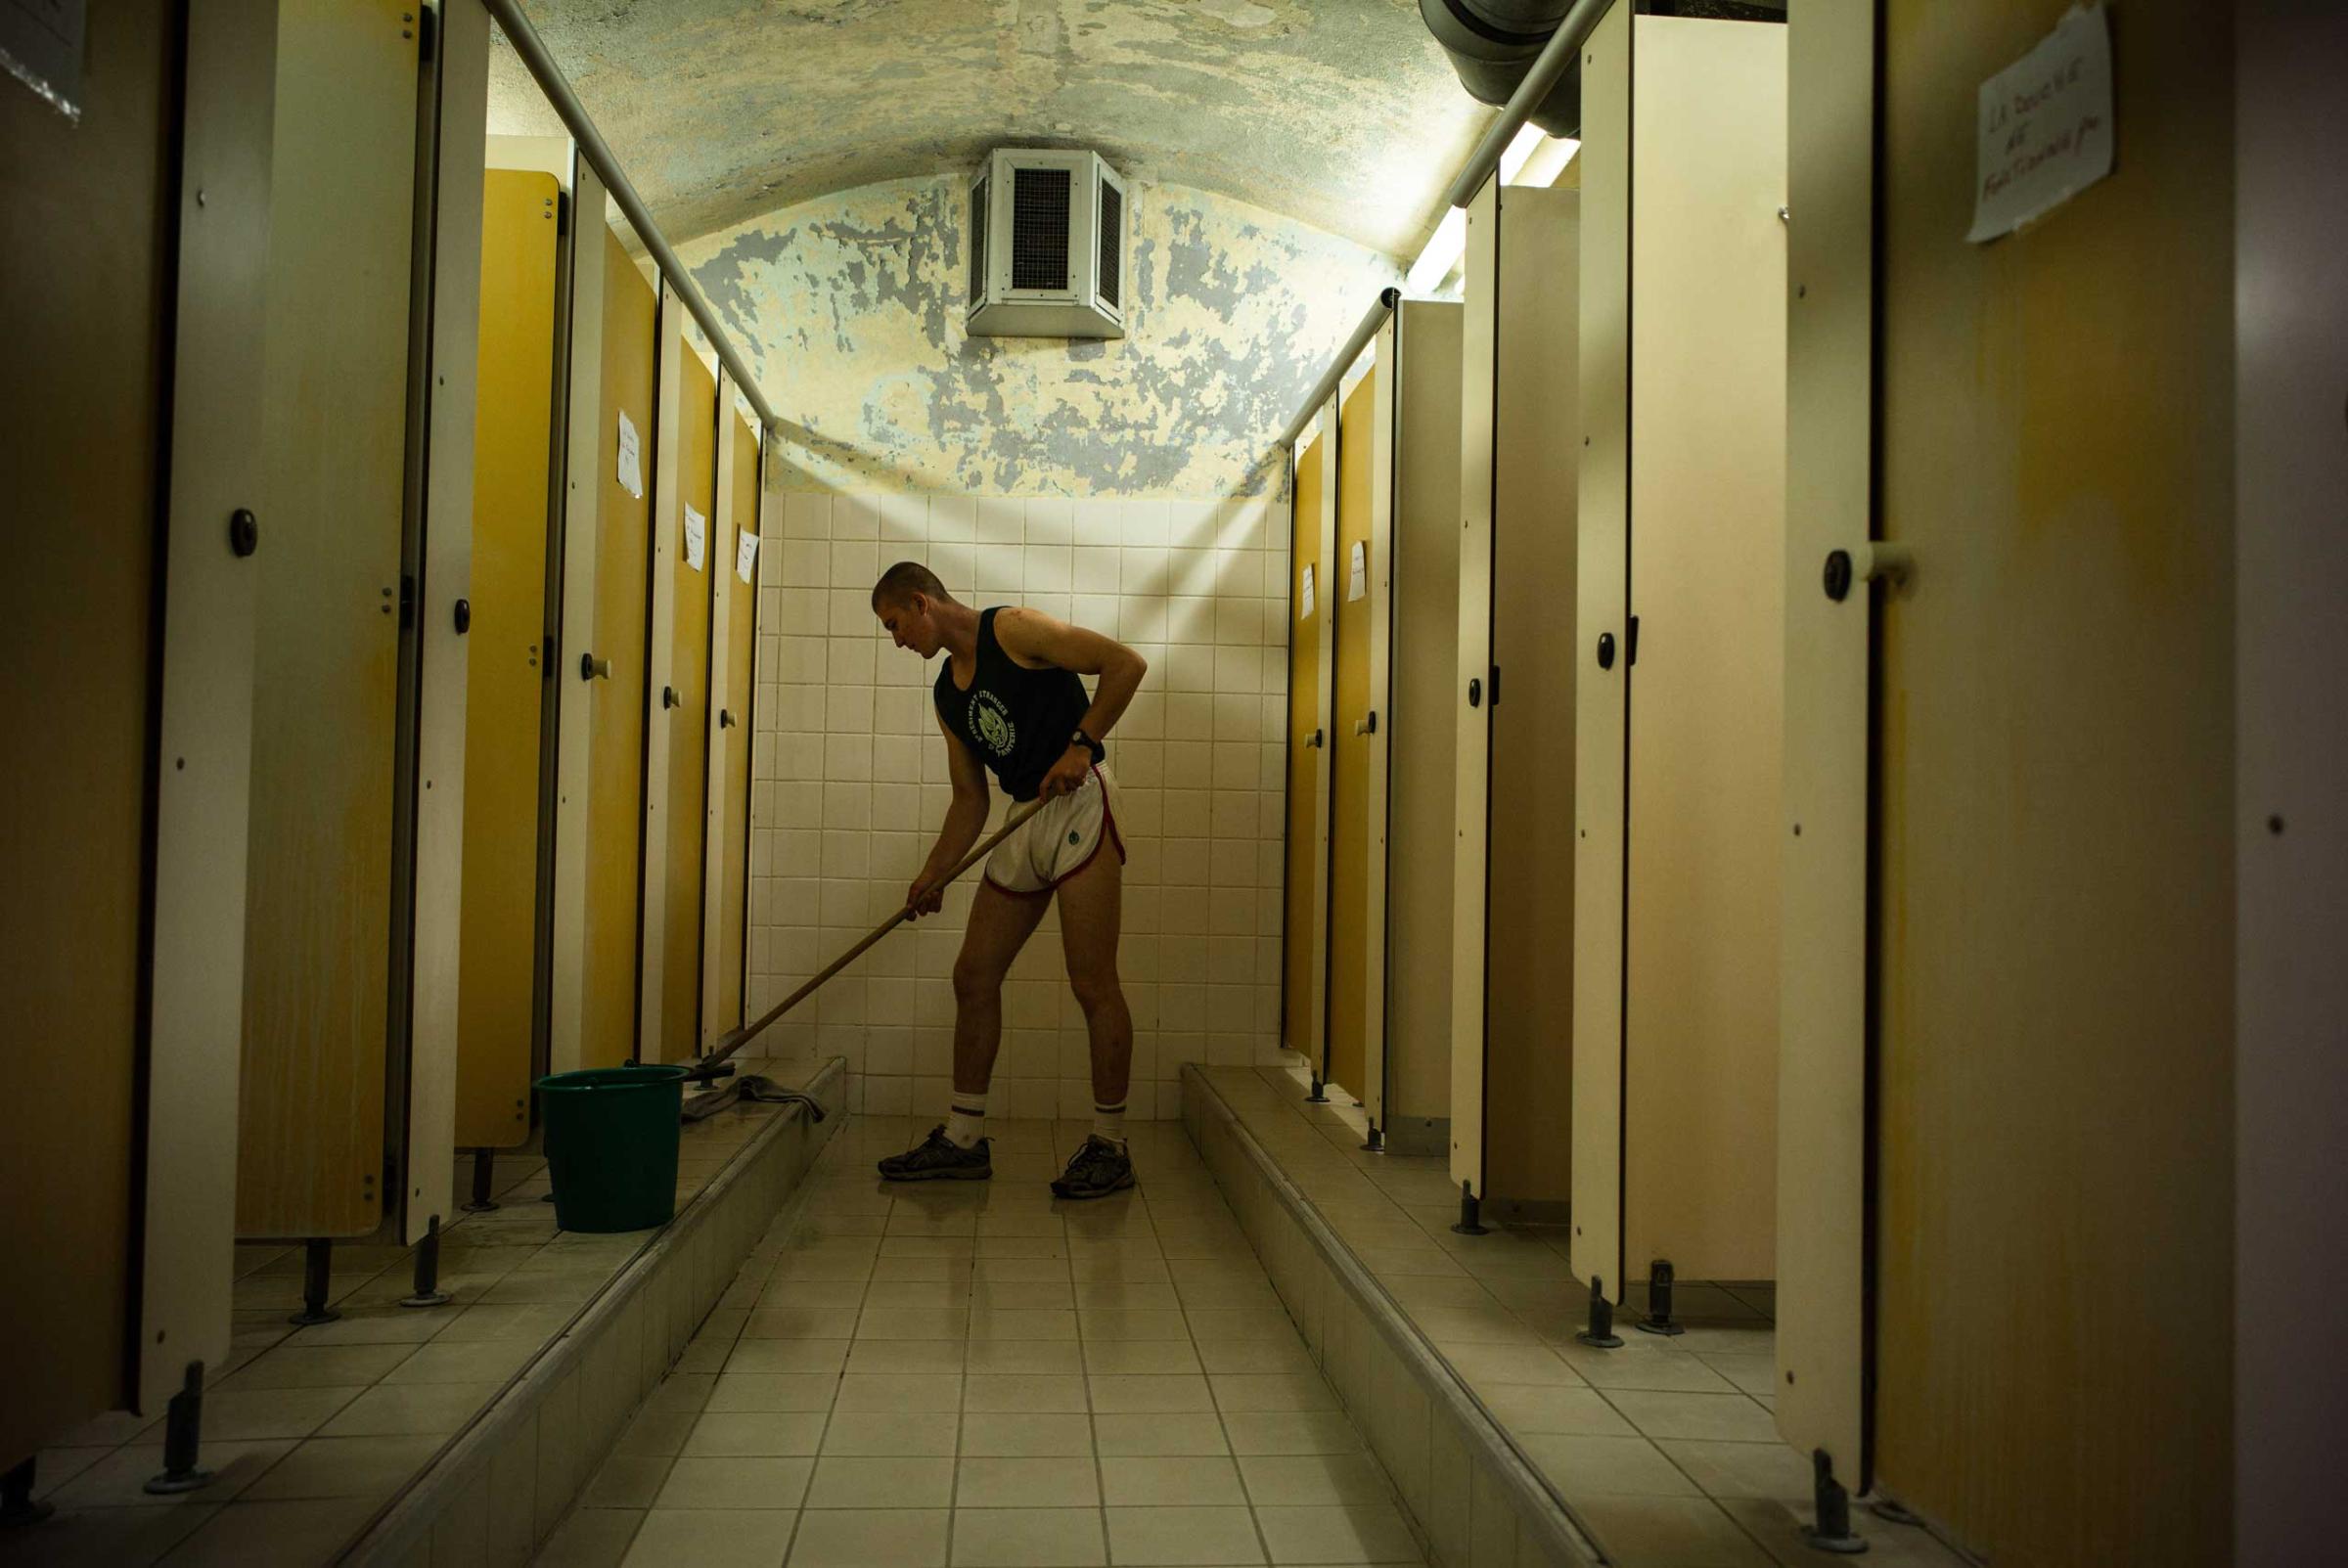 A member of the French Foreign Legion, disciplined by his superiors, cleans the toilets of the Training camp's compound. Aug. 6, 2015.